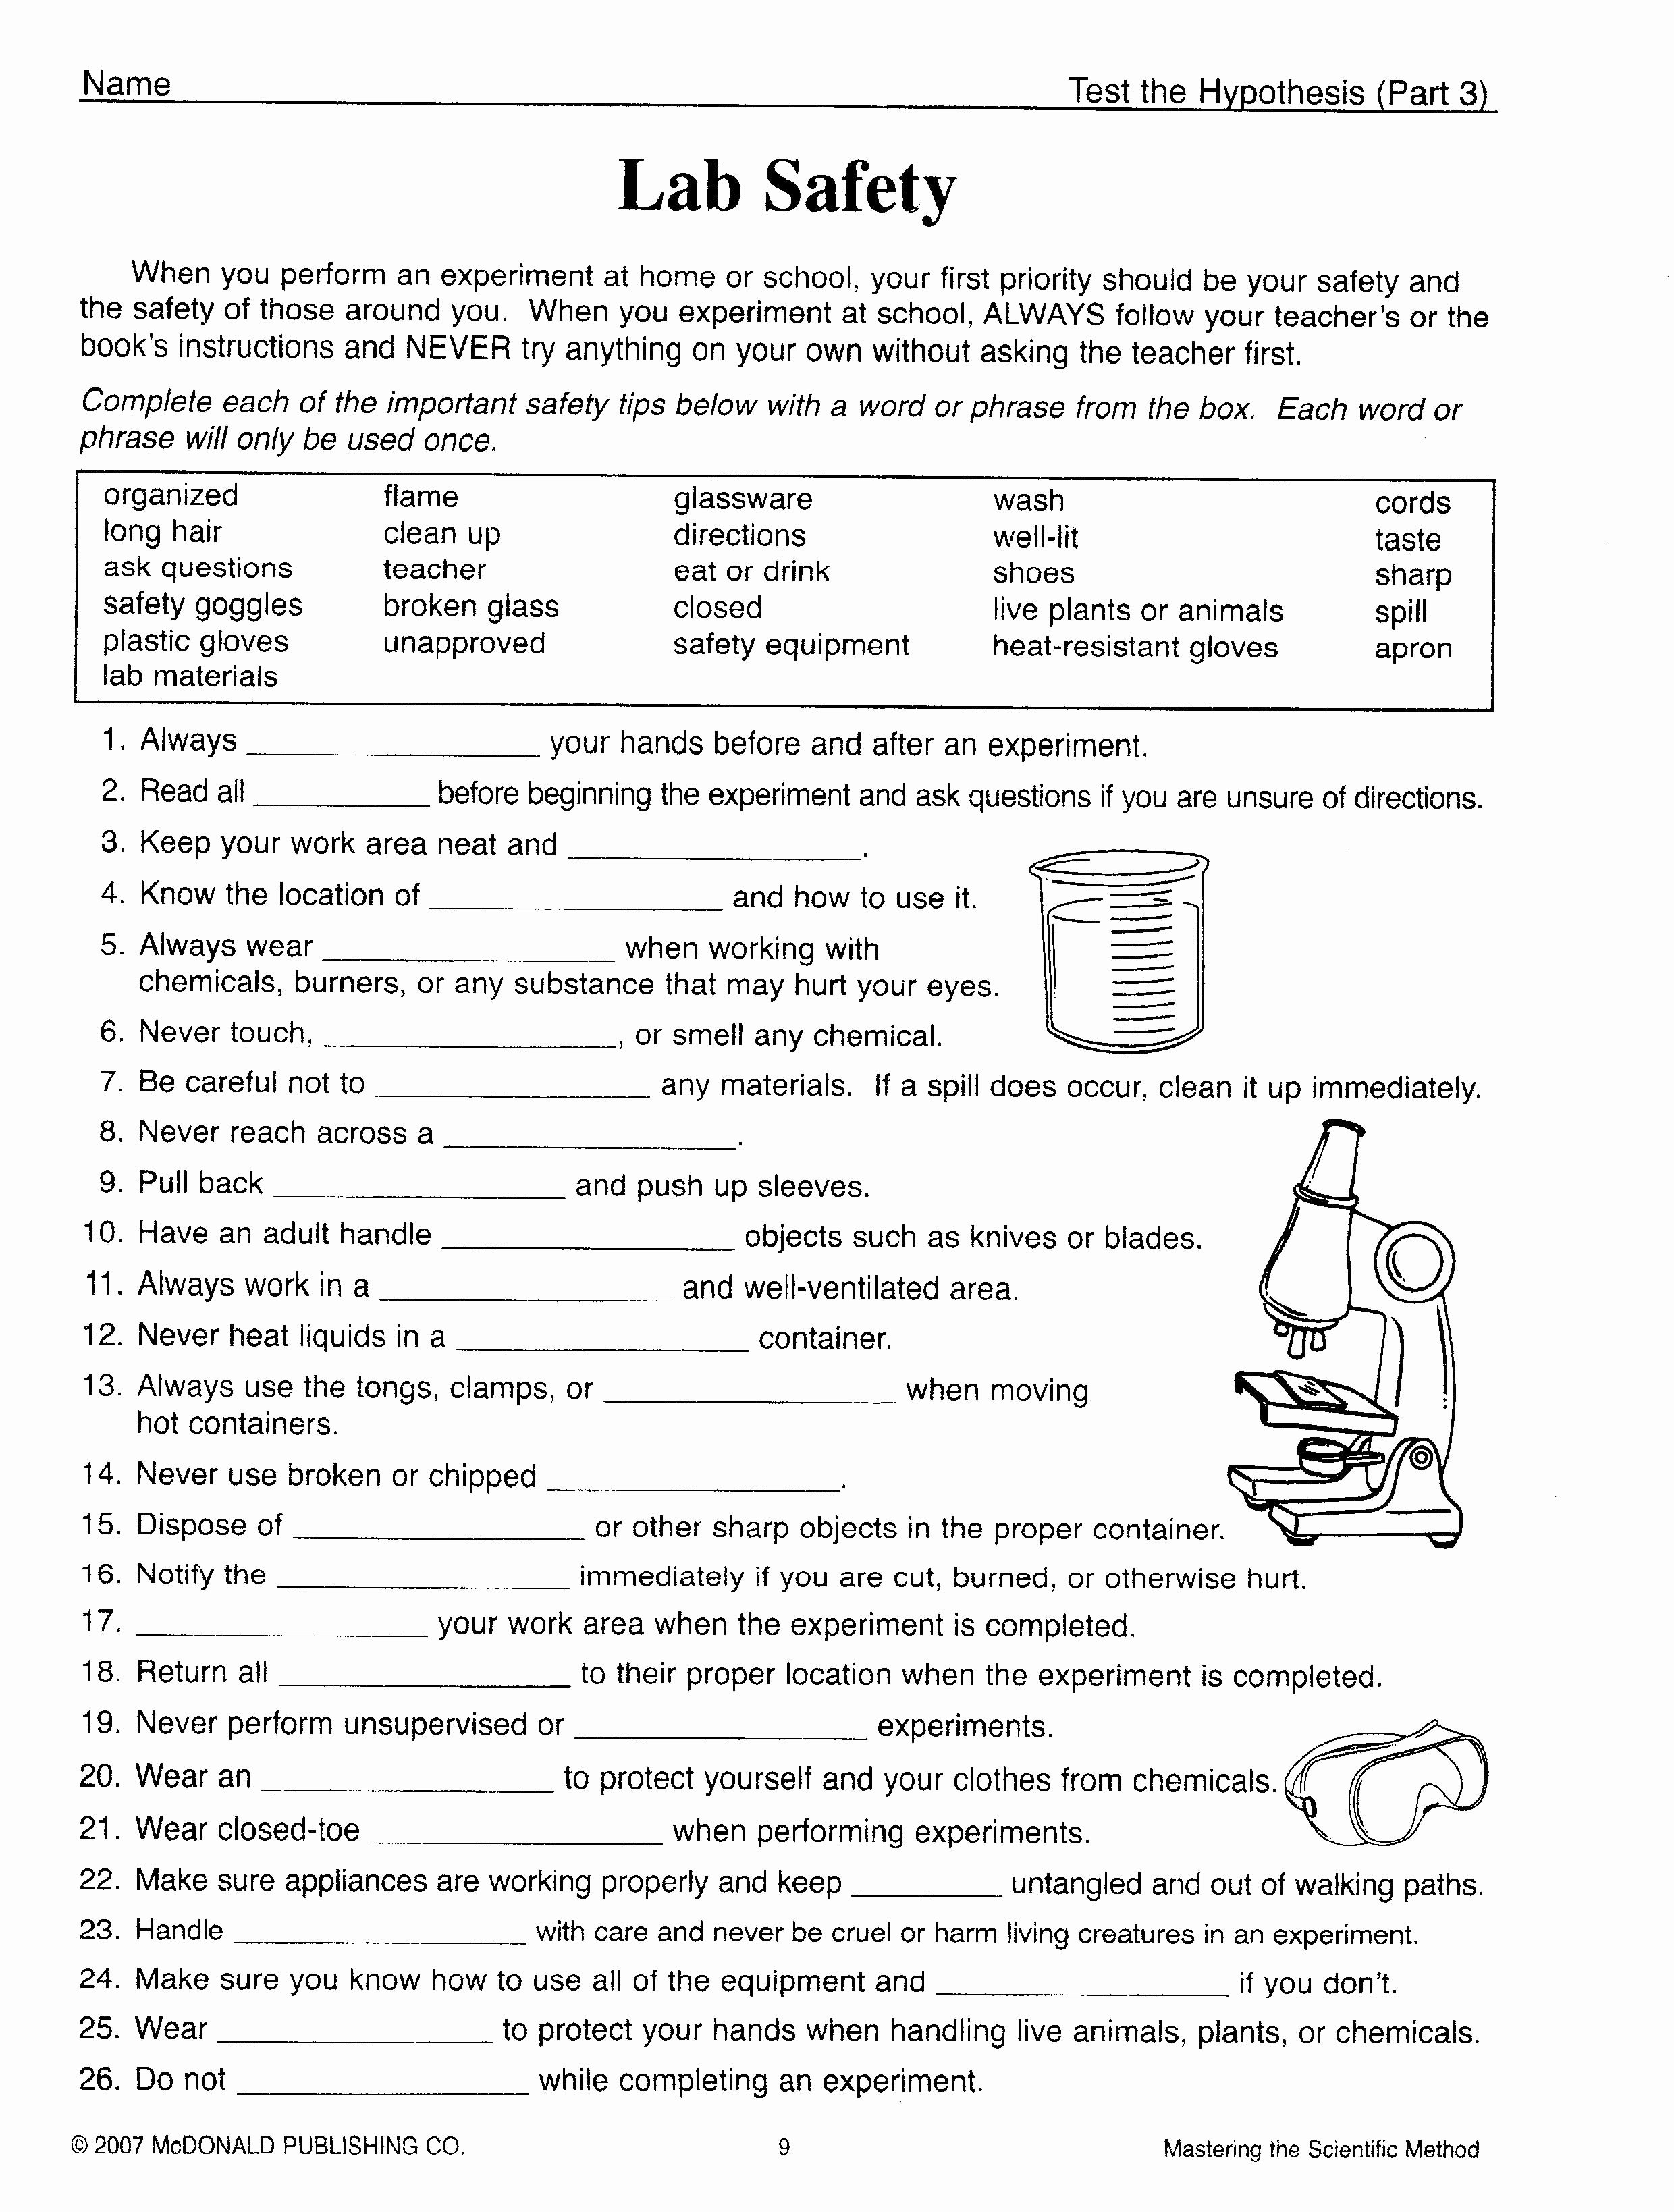 Lab Equipment Worksheet Answer Best Of 7th Grade Science Worksheets Lab Safety 7th Grade